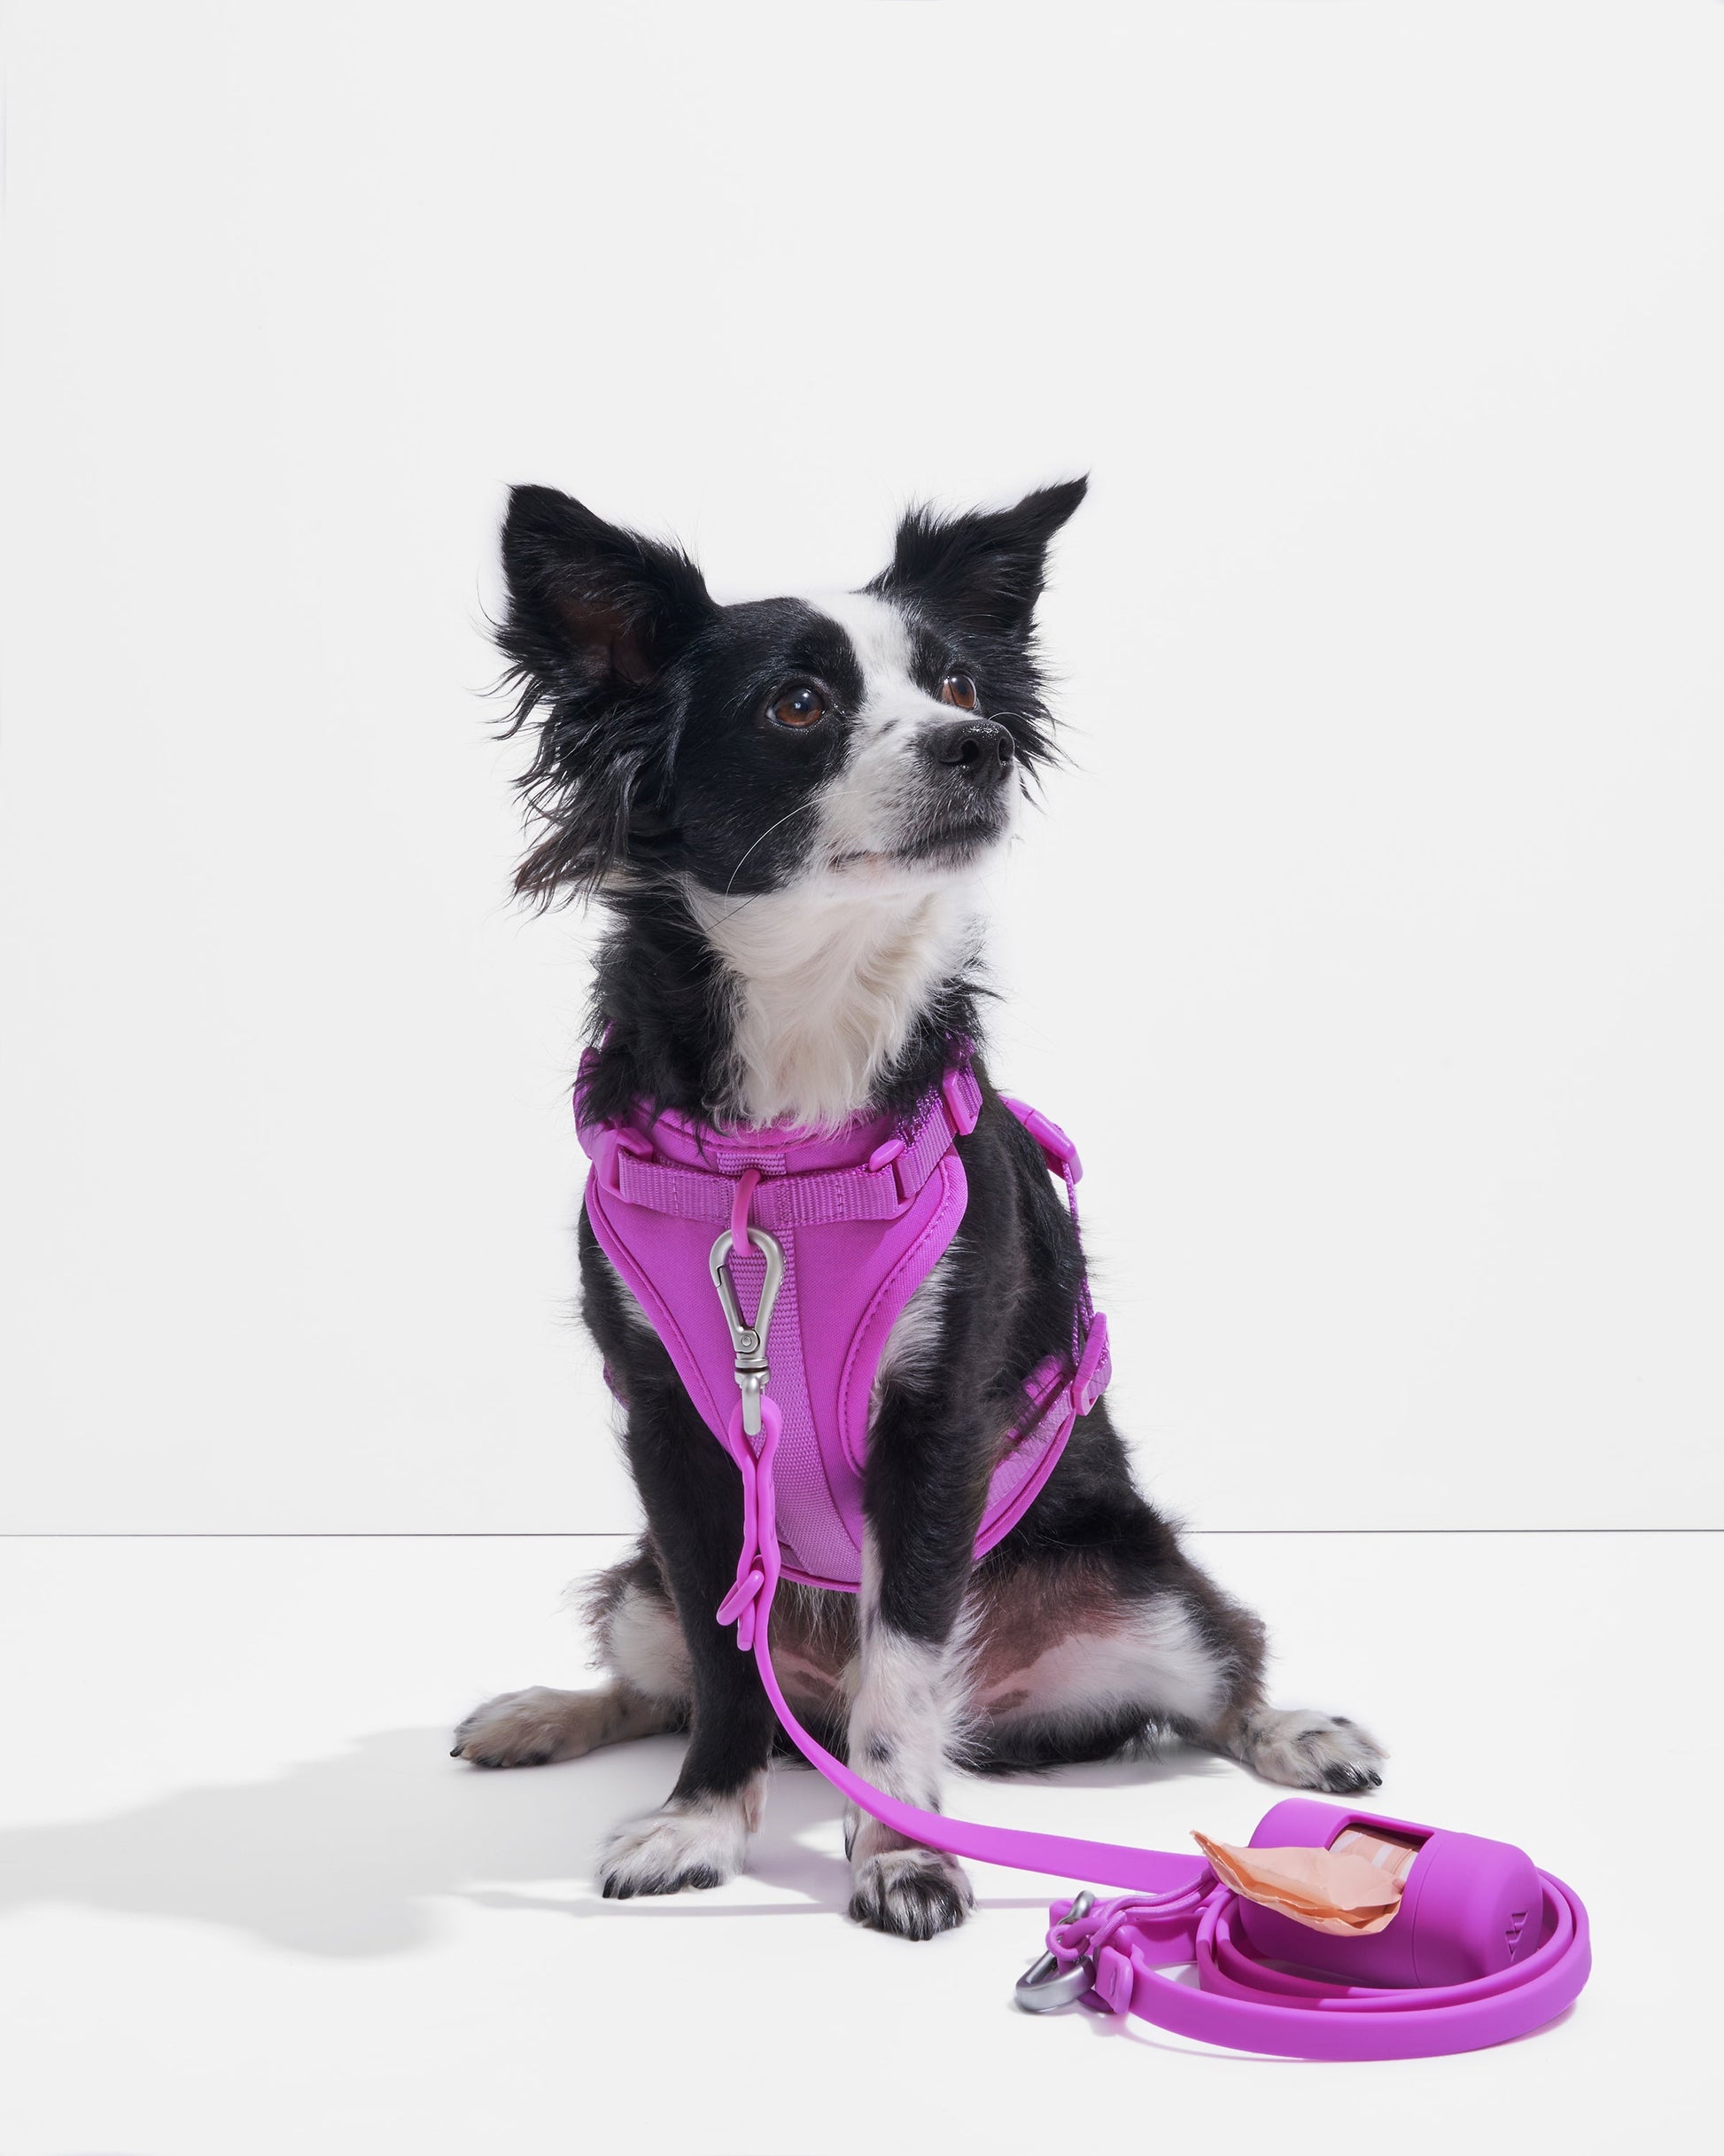 Orchid | Walk Kit includes Harness, Leash, and Poop Bag Carrier